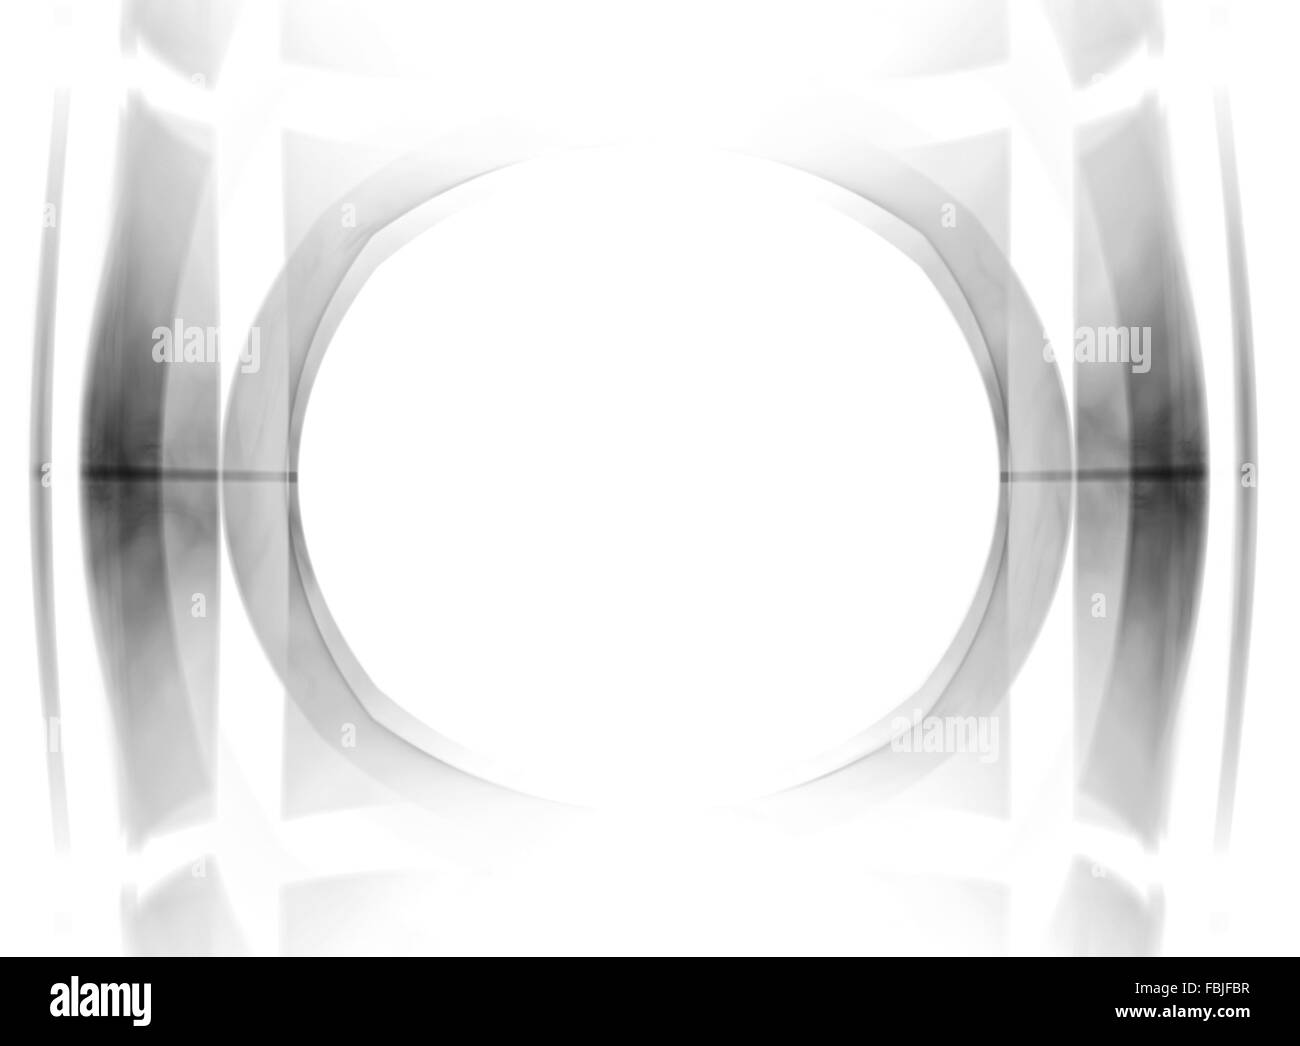 Retro cinema pattern. Abstract background with black-and-white oval frame Stock Photo